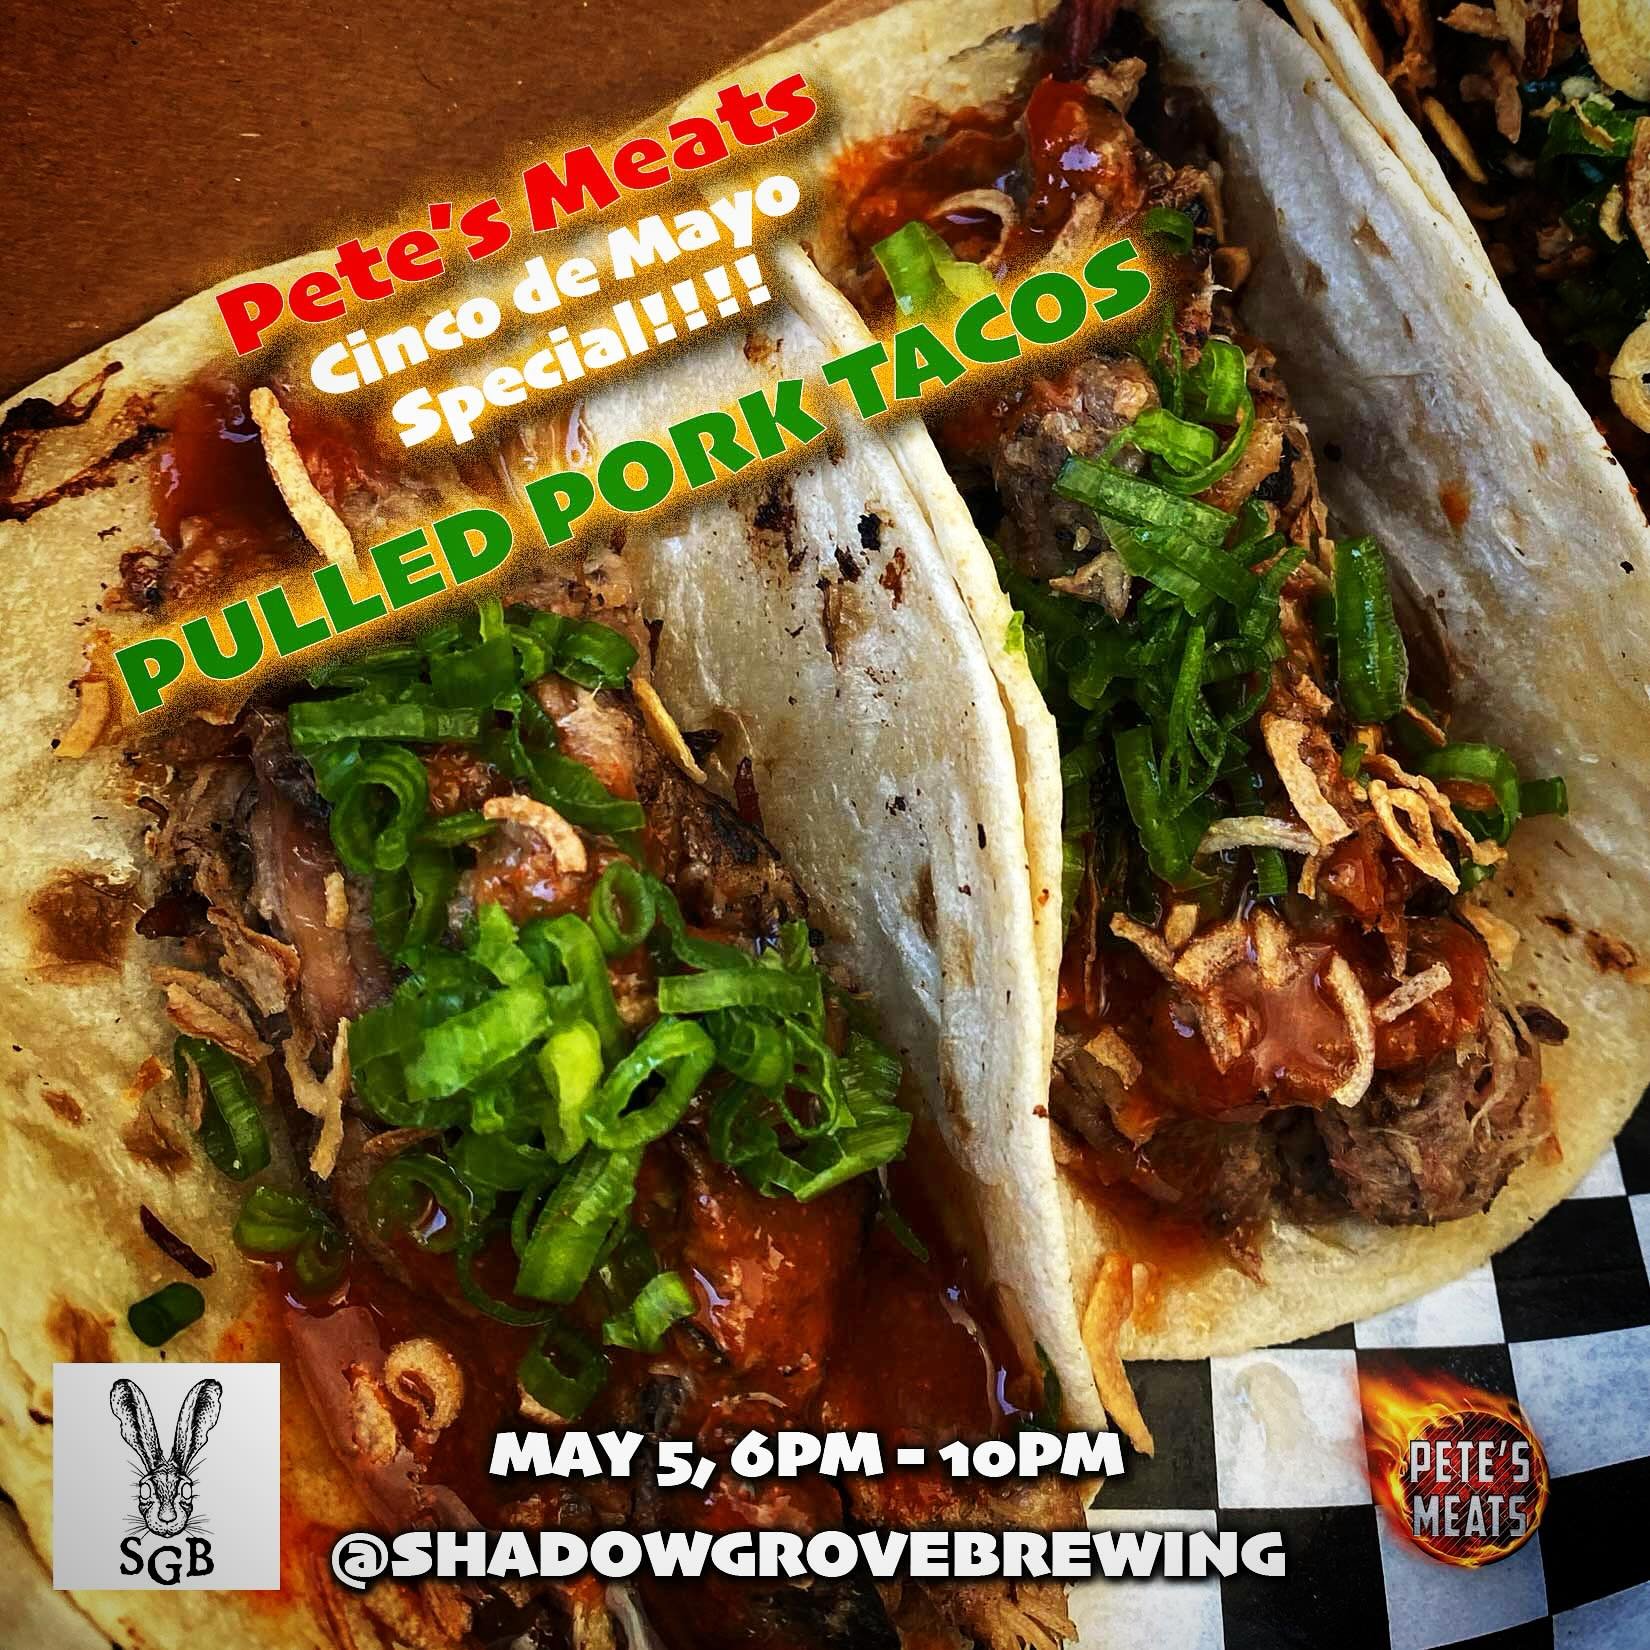 Happy Cinco de Mayo!!! 
We will be @shadowgrovebrewing 
this Sunday the 5th of Mayo.

Pulled Pork Tacos Special
2 for $10.

Come get your tacos!!!